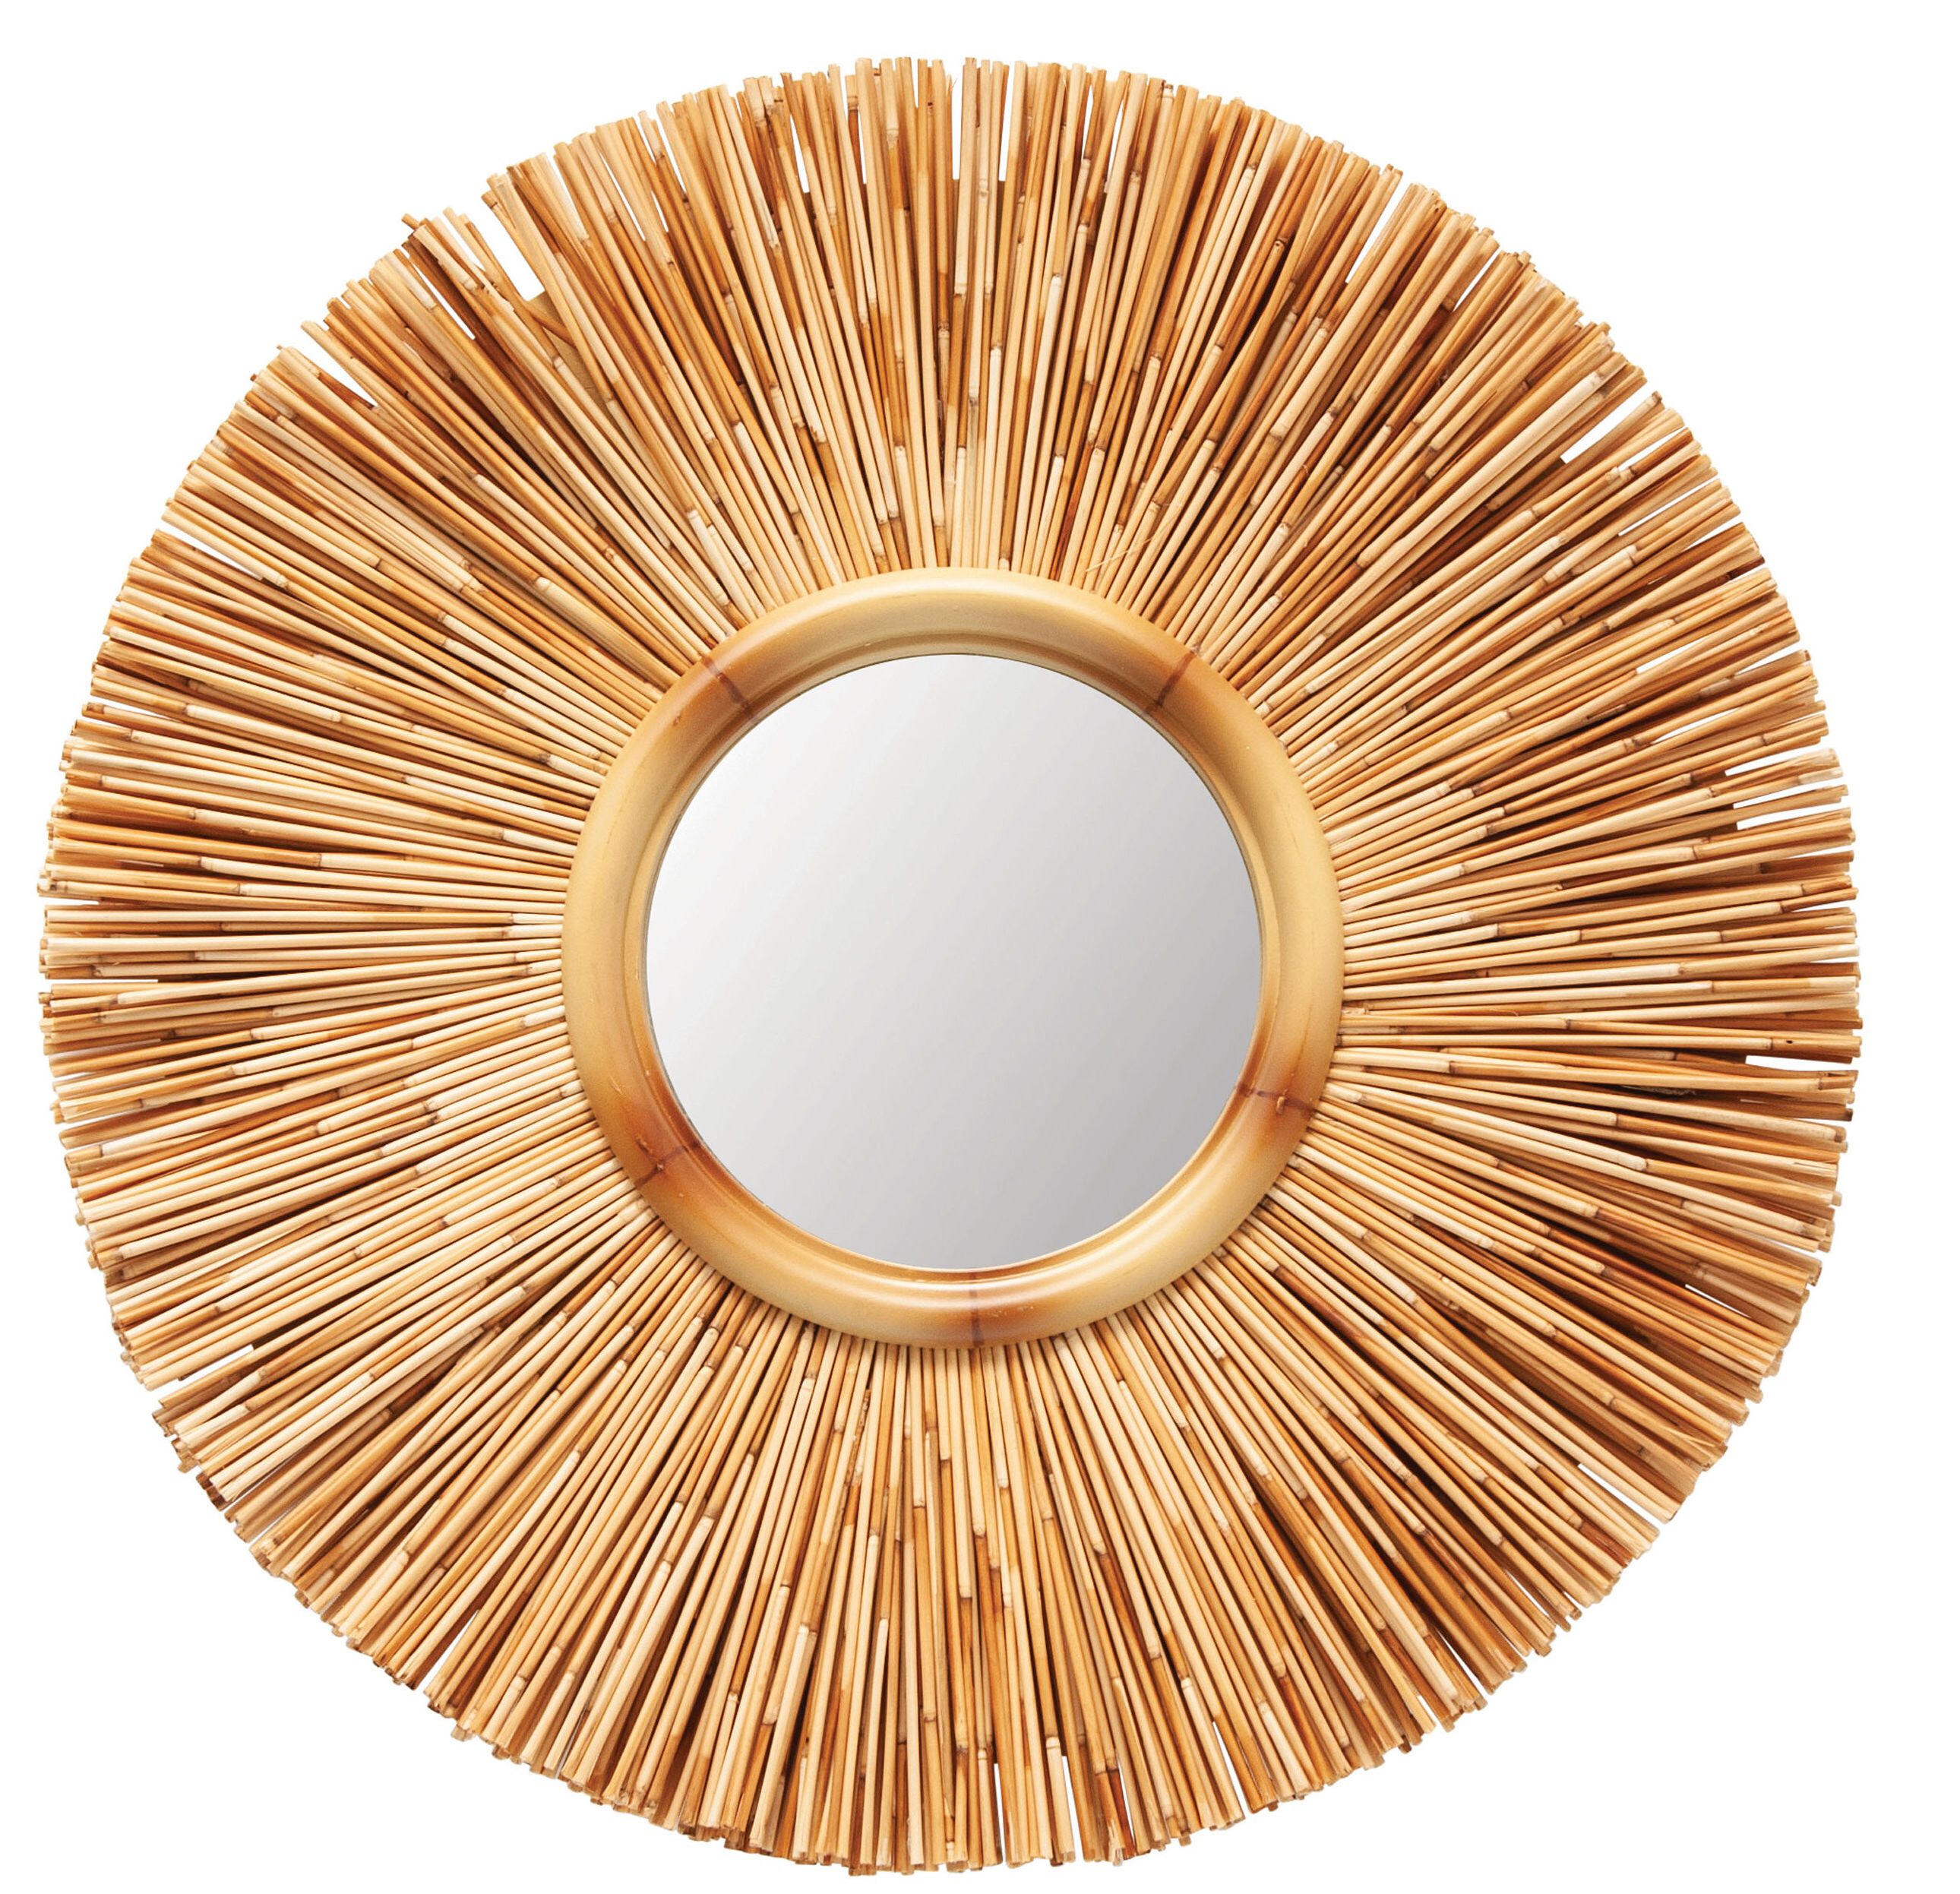 Most Popular Kluesner Round Reed Cottage Wall Mirror Regarding Karn Vertical Round Resin Wall Mirrors (View 18 of 20)